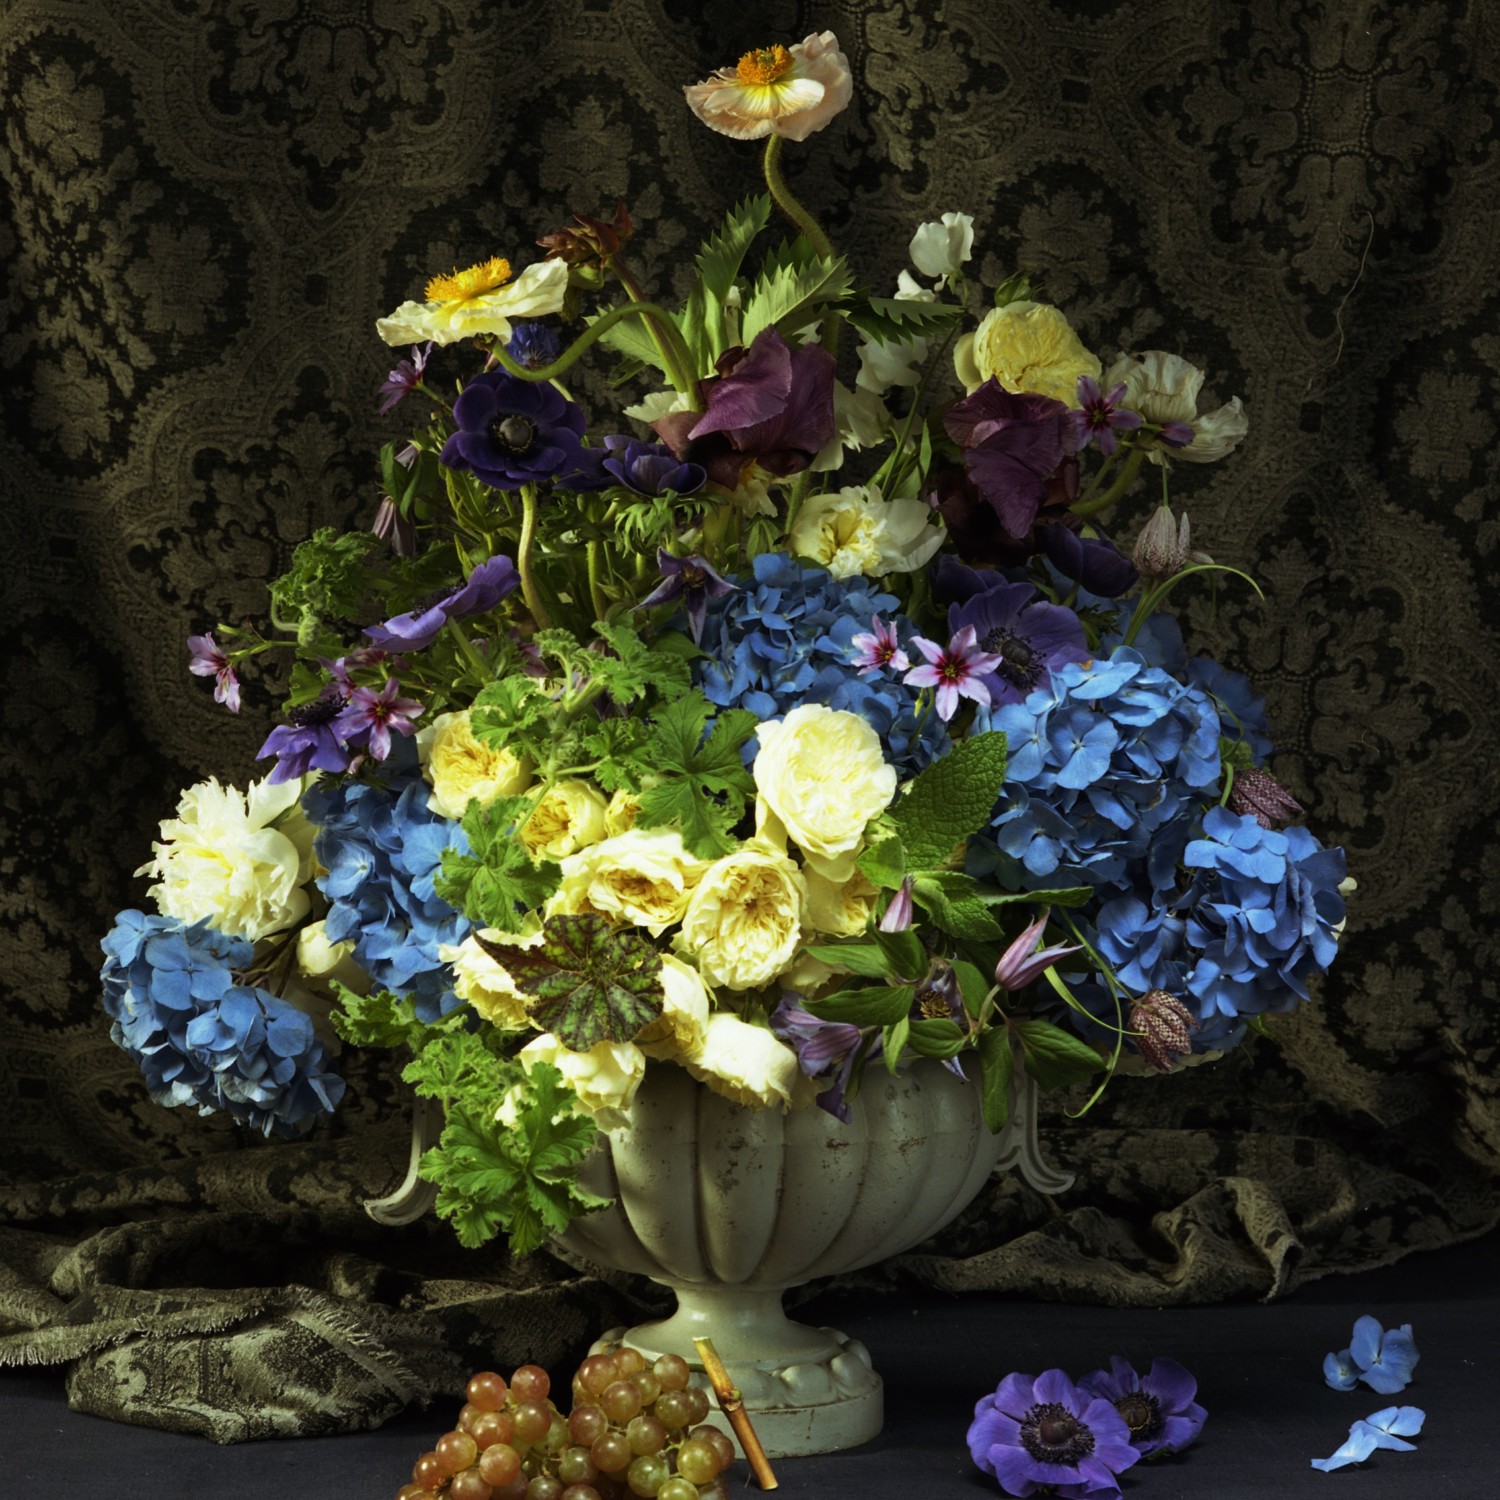 Arrangement of yellow peonies and garden roses pop against nautical-blue hydrangeas and violet anemones, designed by Lewis Miller.